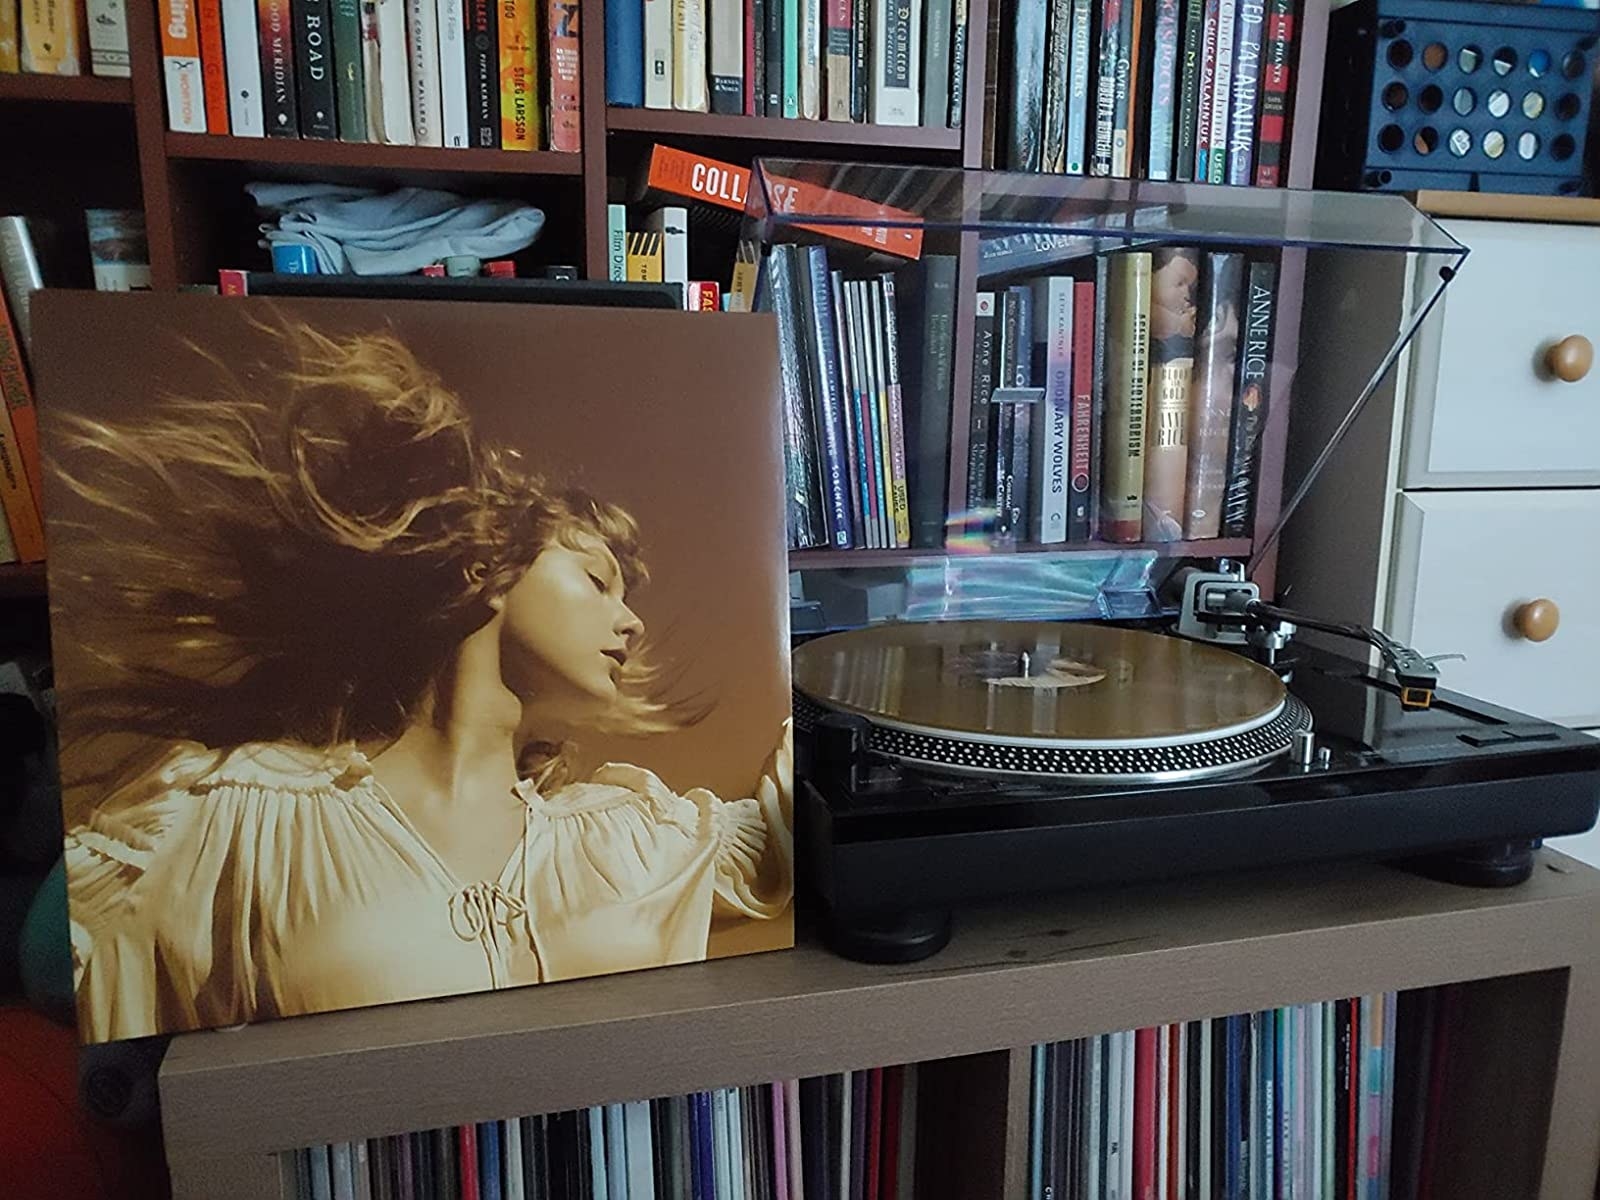 taylor switft&#x27;s &quot;fearless (taylor&#x27;s version)&quot; in gold album cover standing next to a record player with the gold vinyl record in the player